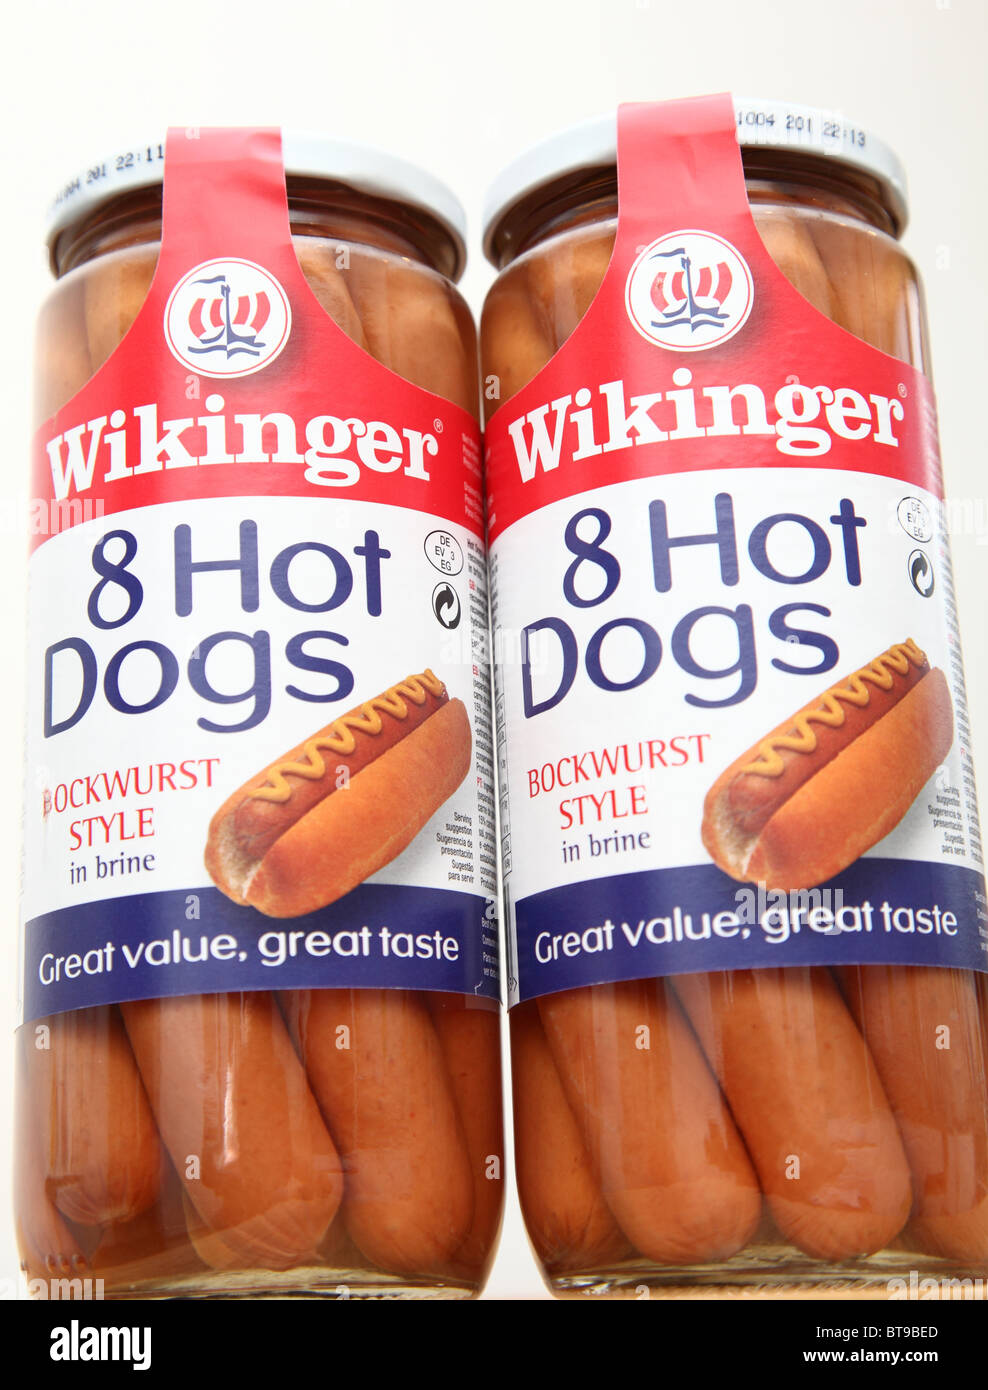 Wikinger hot dogs. Stock Photo